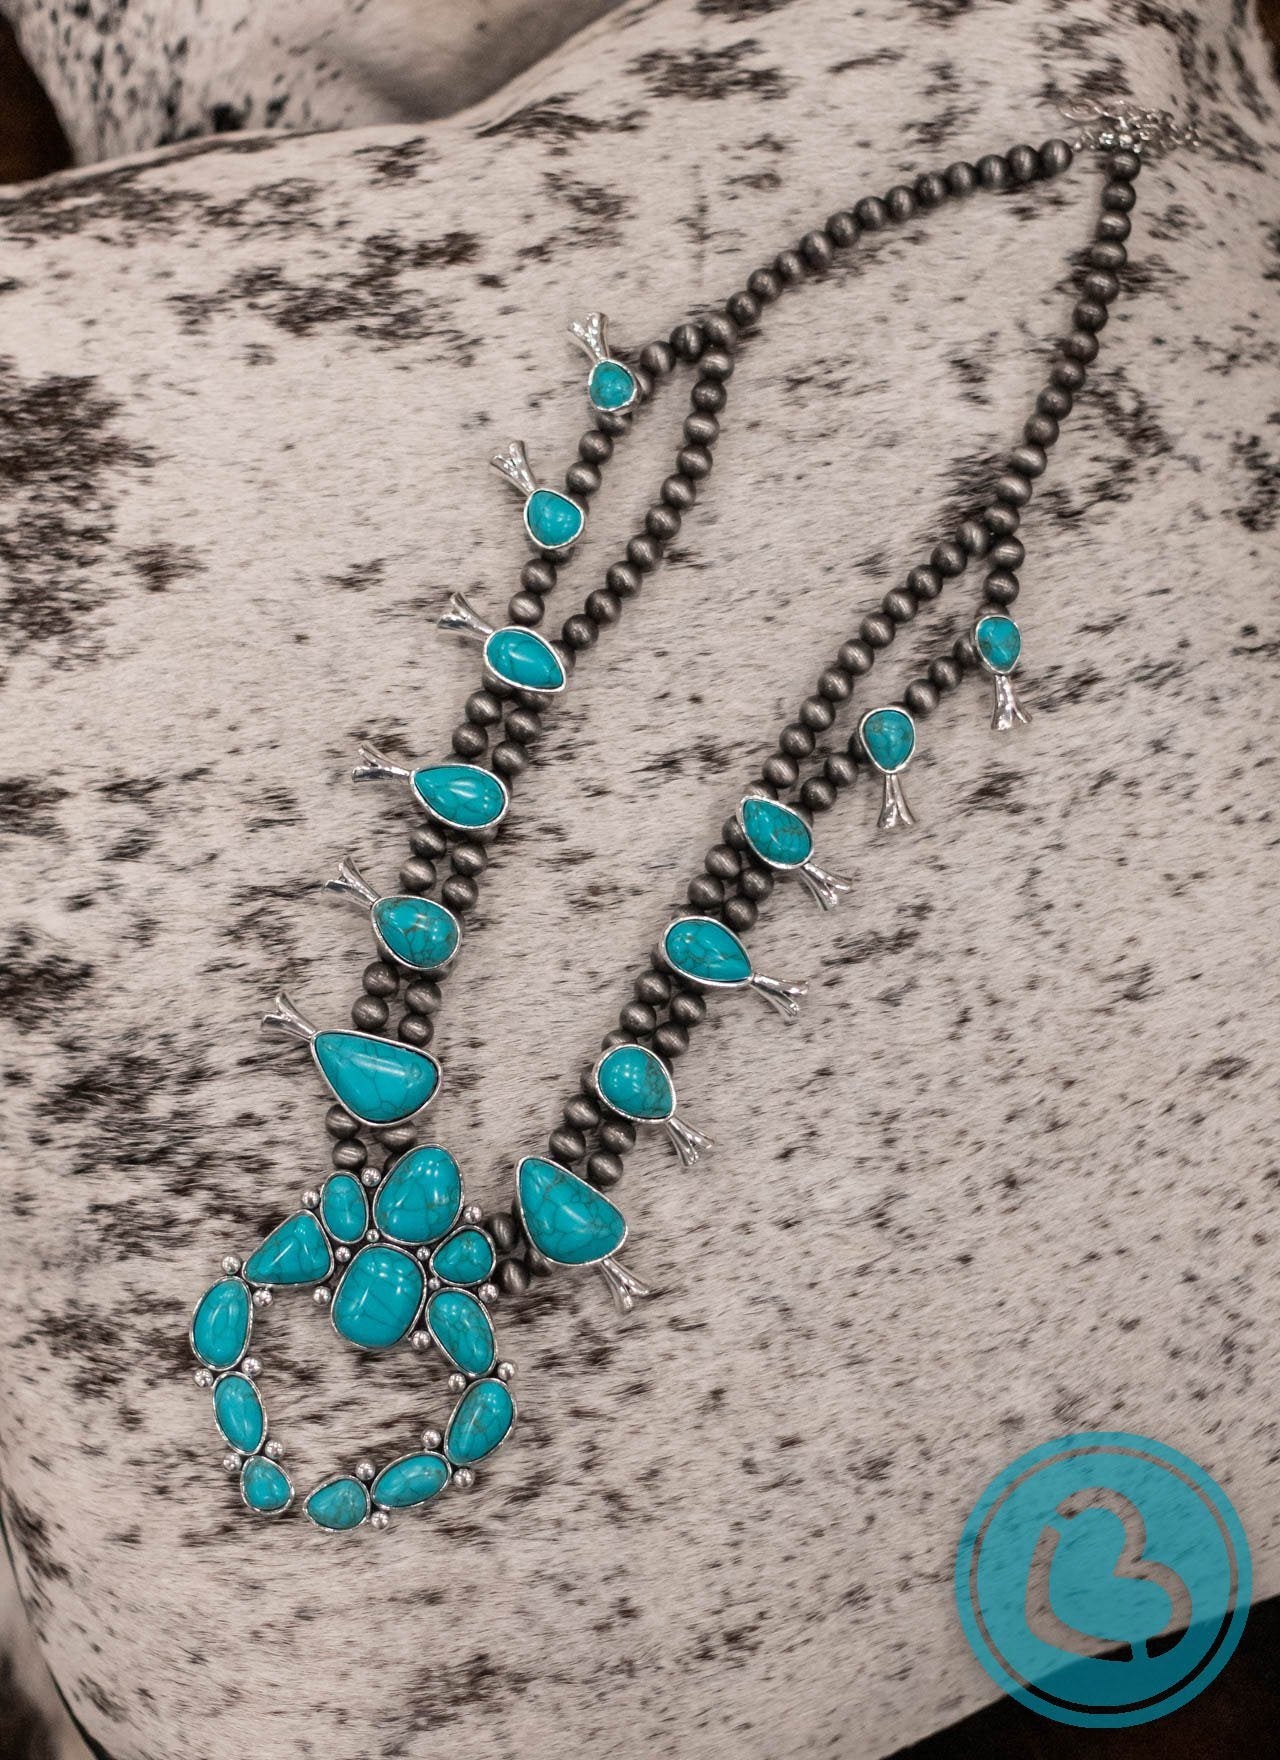 The Harper Squash Blossom Necklace in Turquoise Jewelry 18 